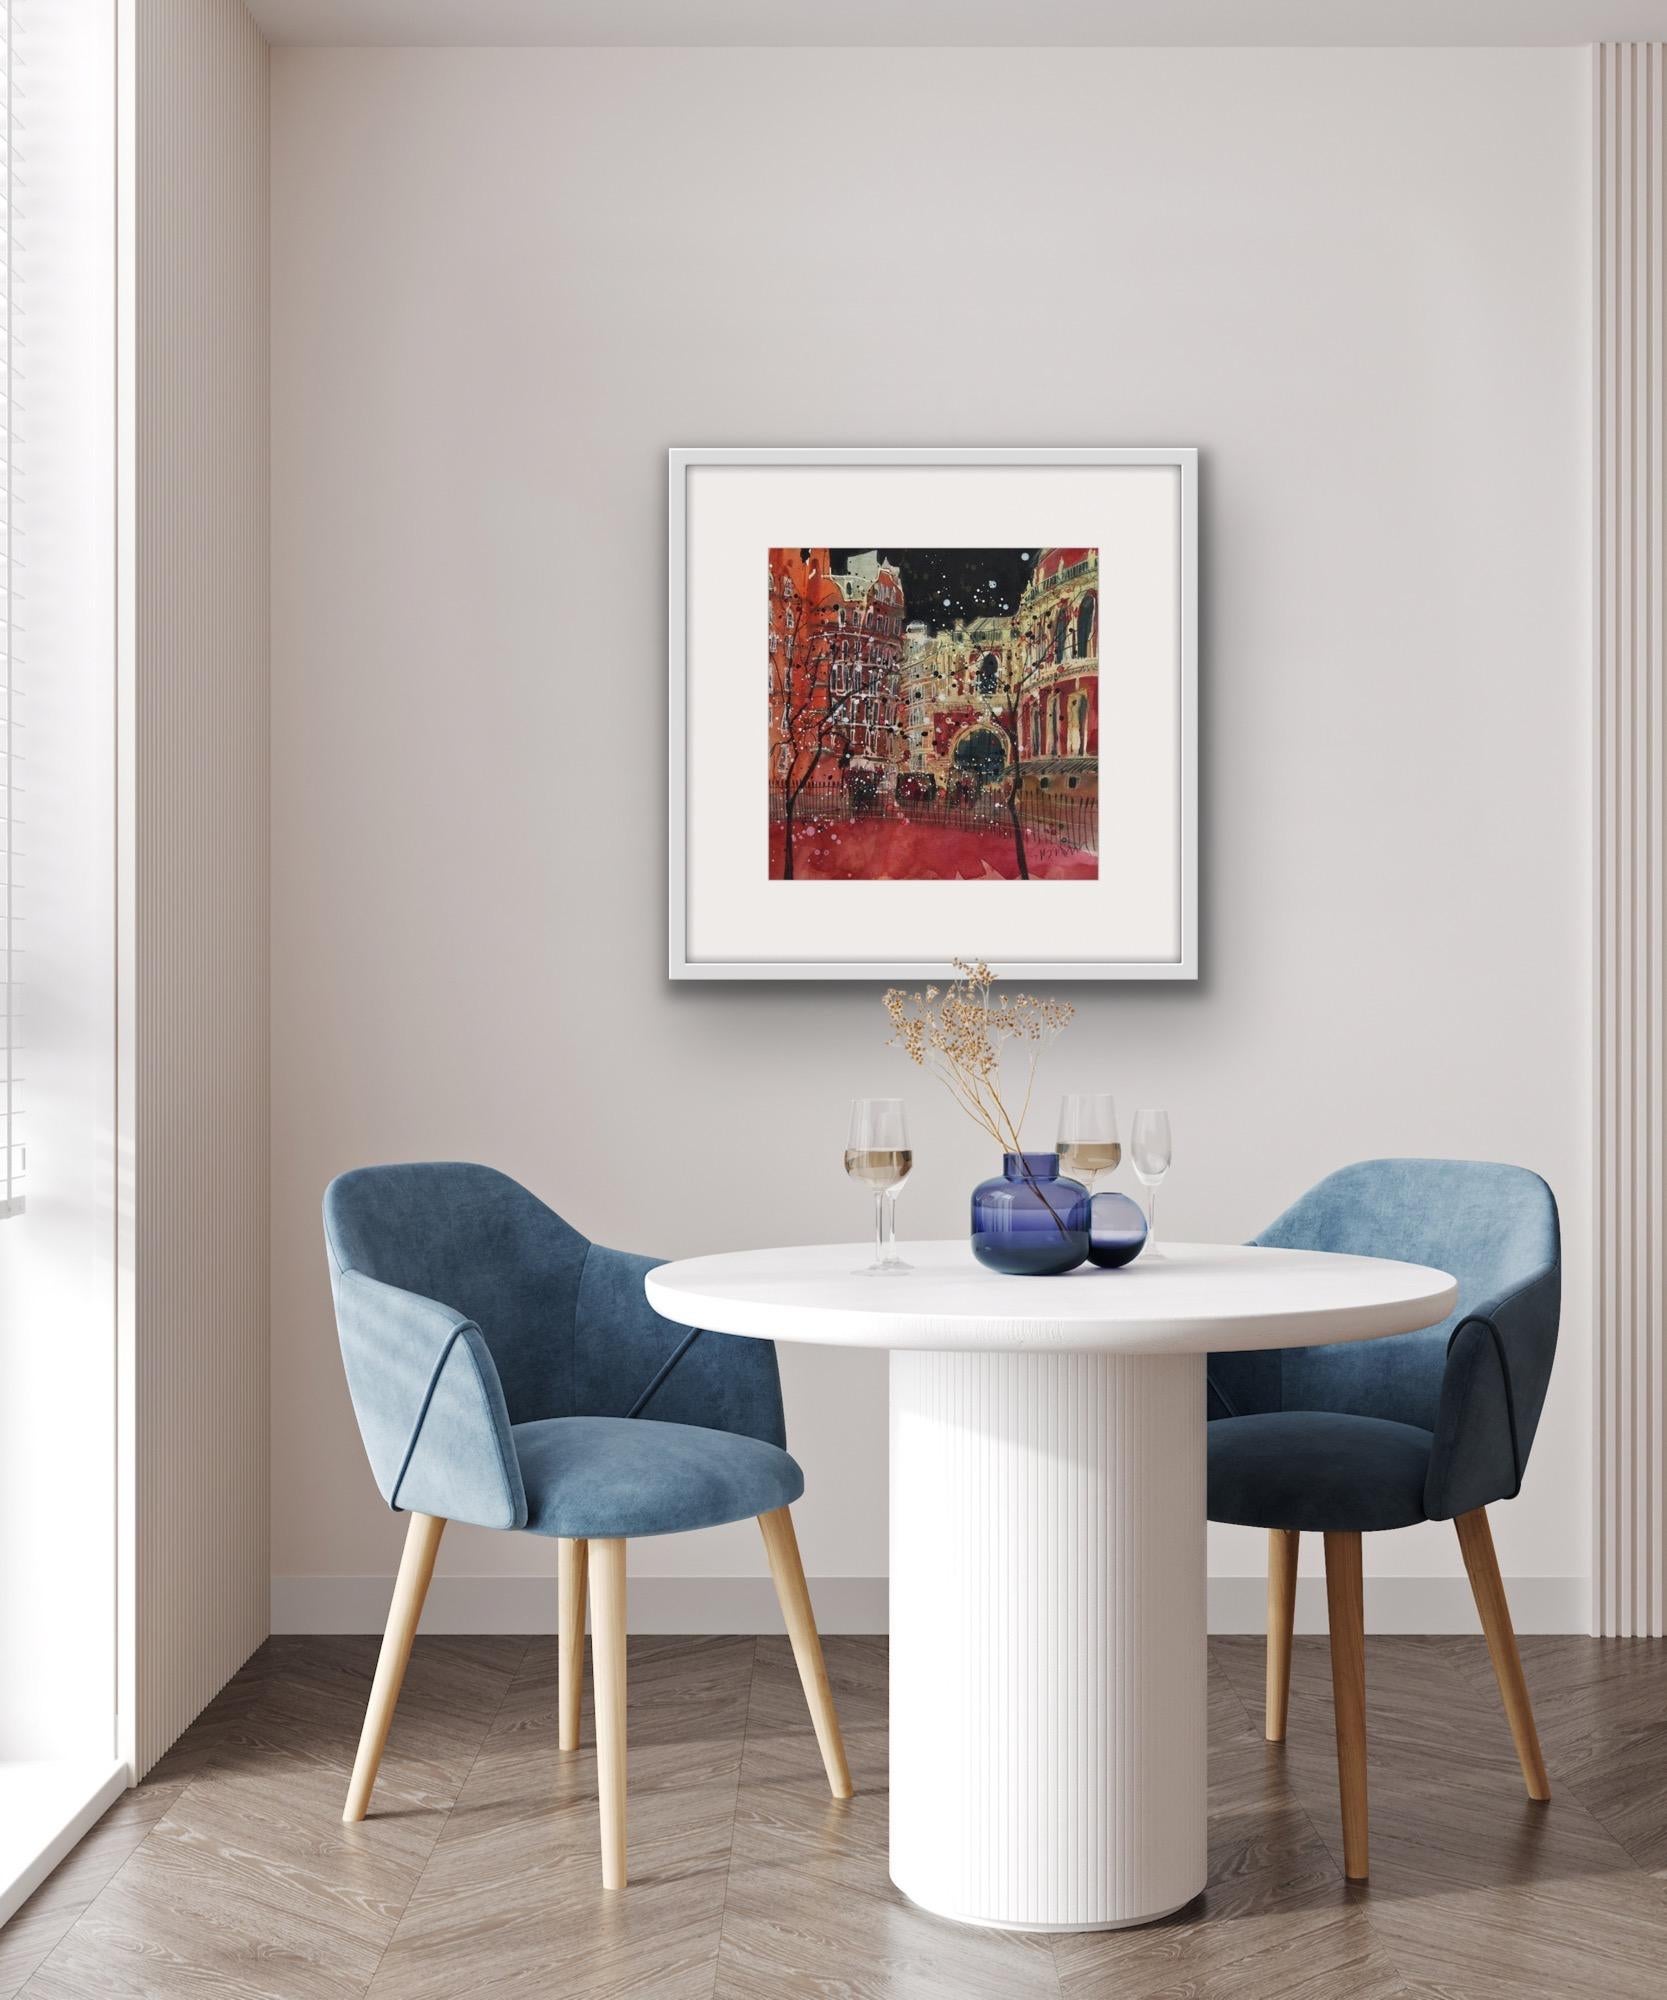 The Royal Albert Hall was modelled on a Roman amphitheatre, it has a beautiful frieze to the arts and sciences - It is the home of the 'Proms' and the painting shows a view from Kensington Gardens looking towards one of the many entrances.
Discover